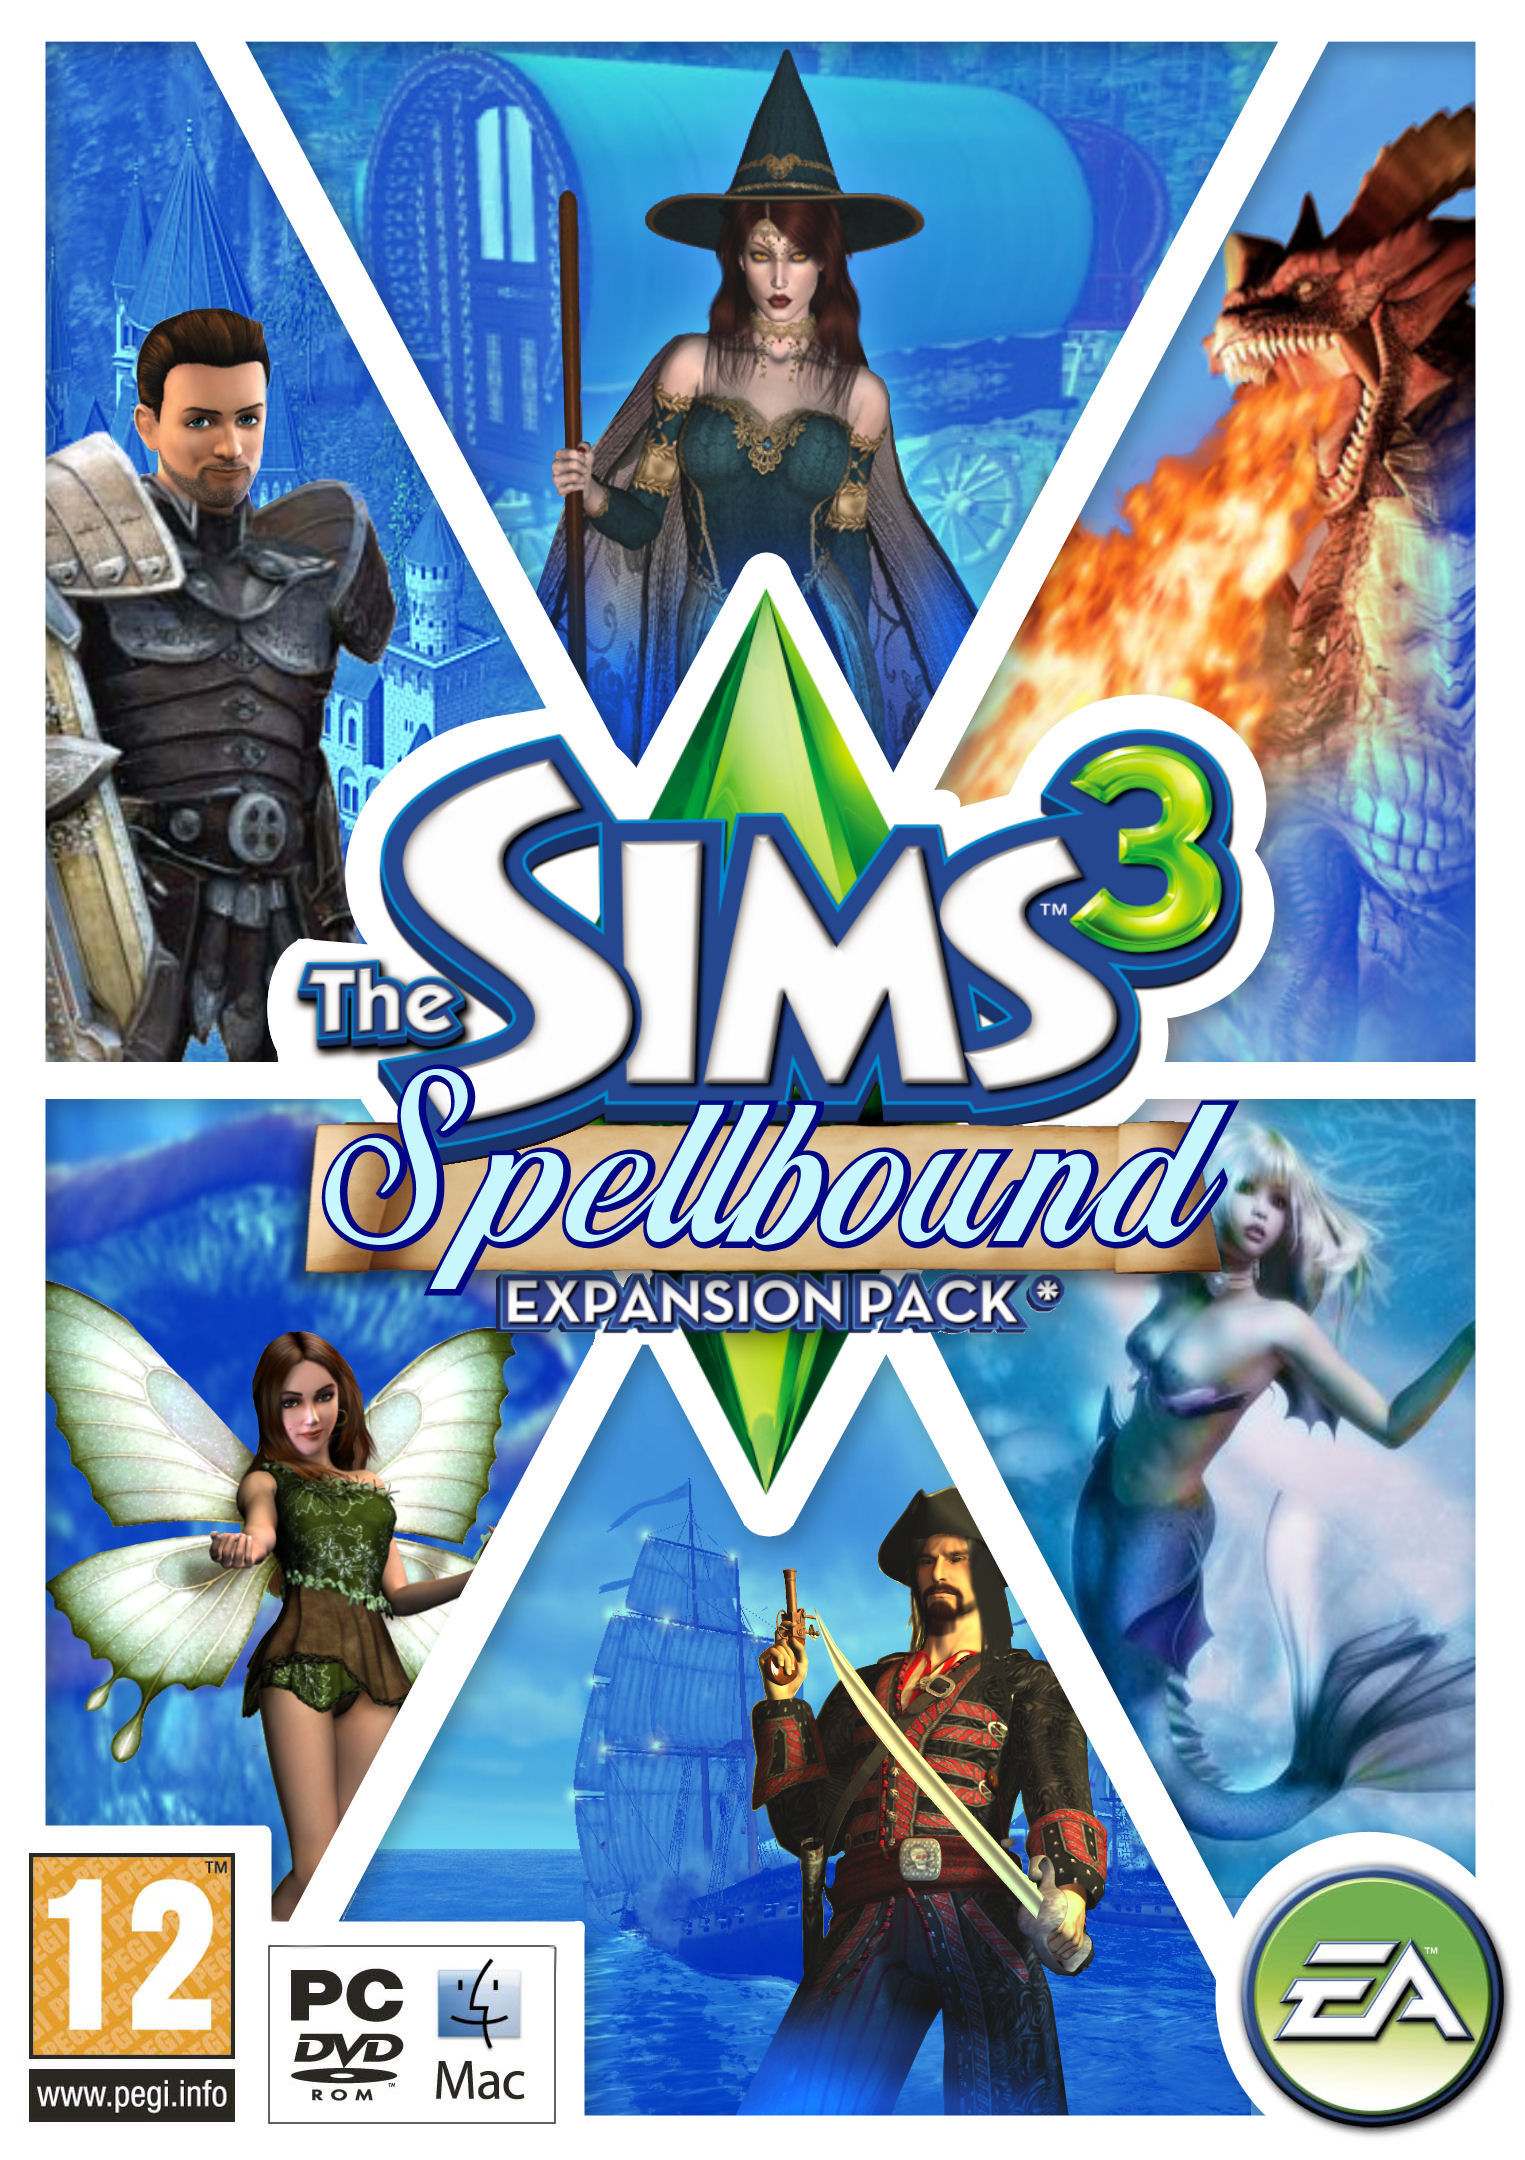 sims 4 how to get expansion packs for free